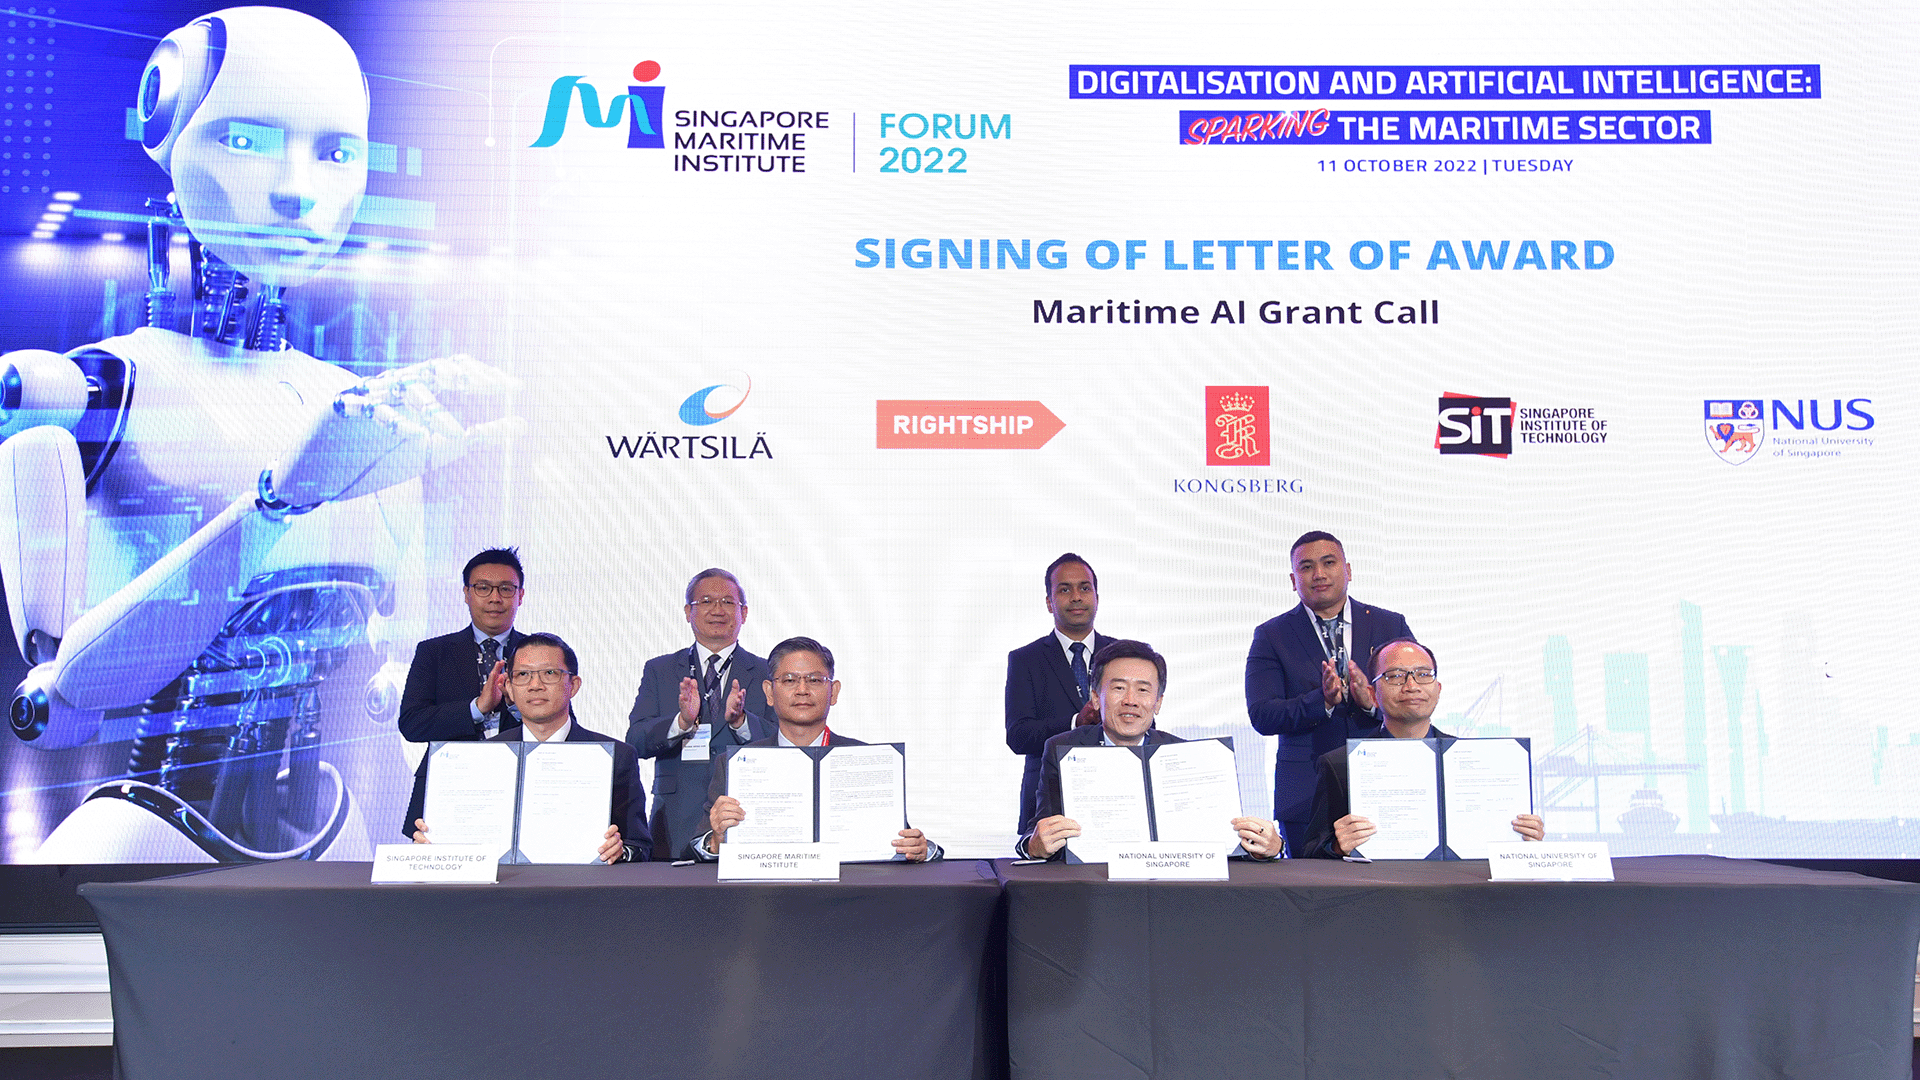 Signing of the Letter of Award for the Maritime AI Grant Call